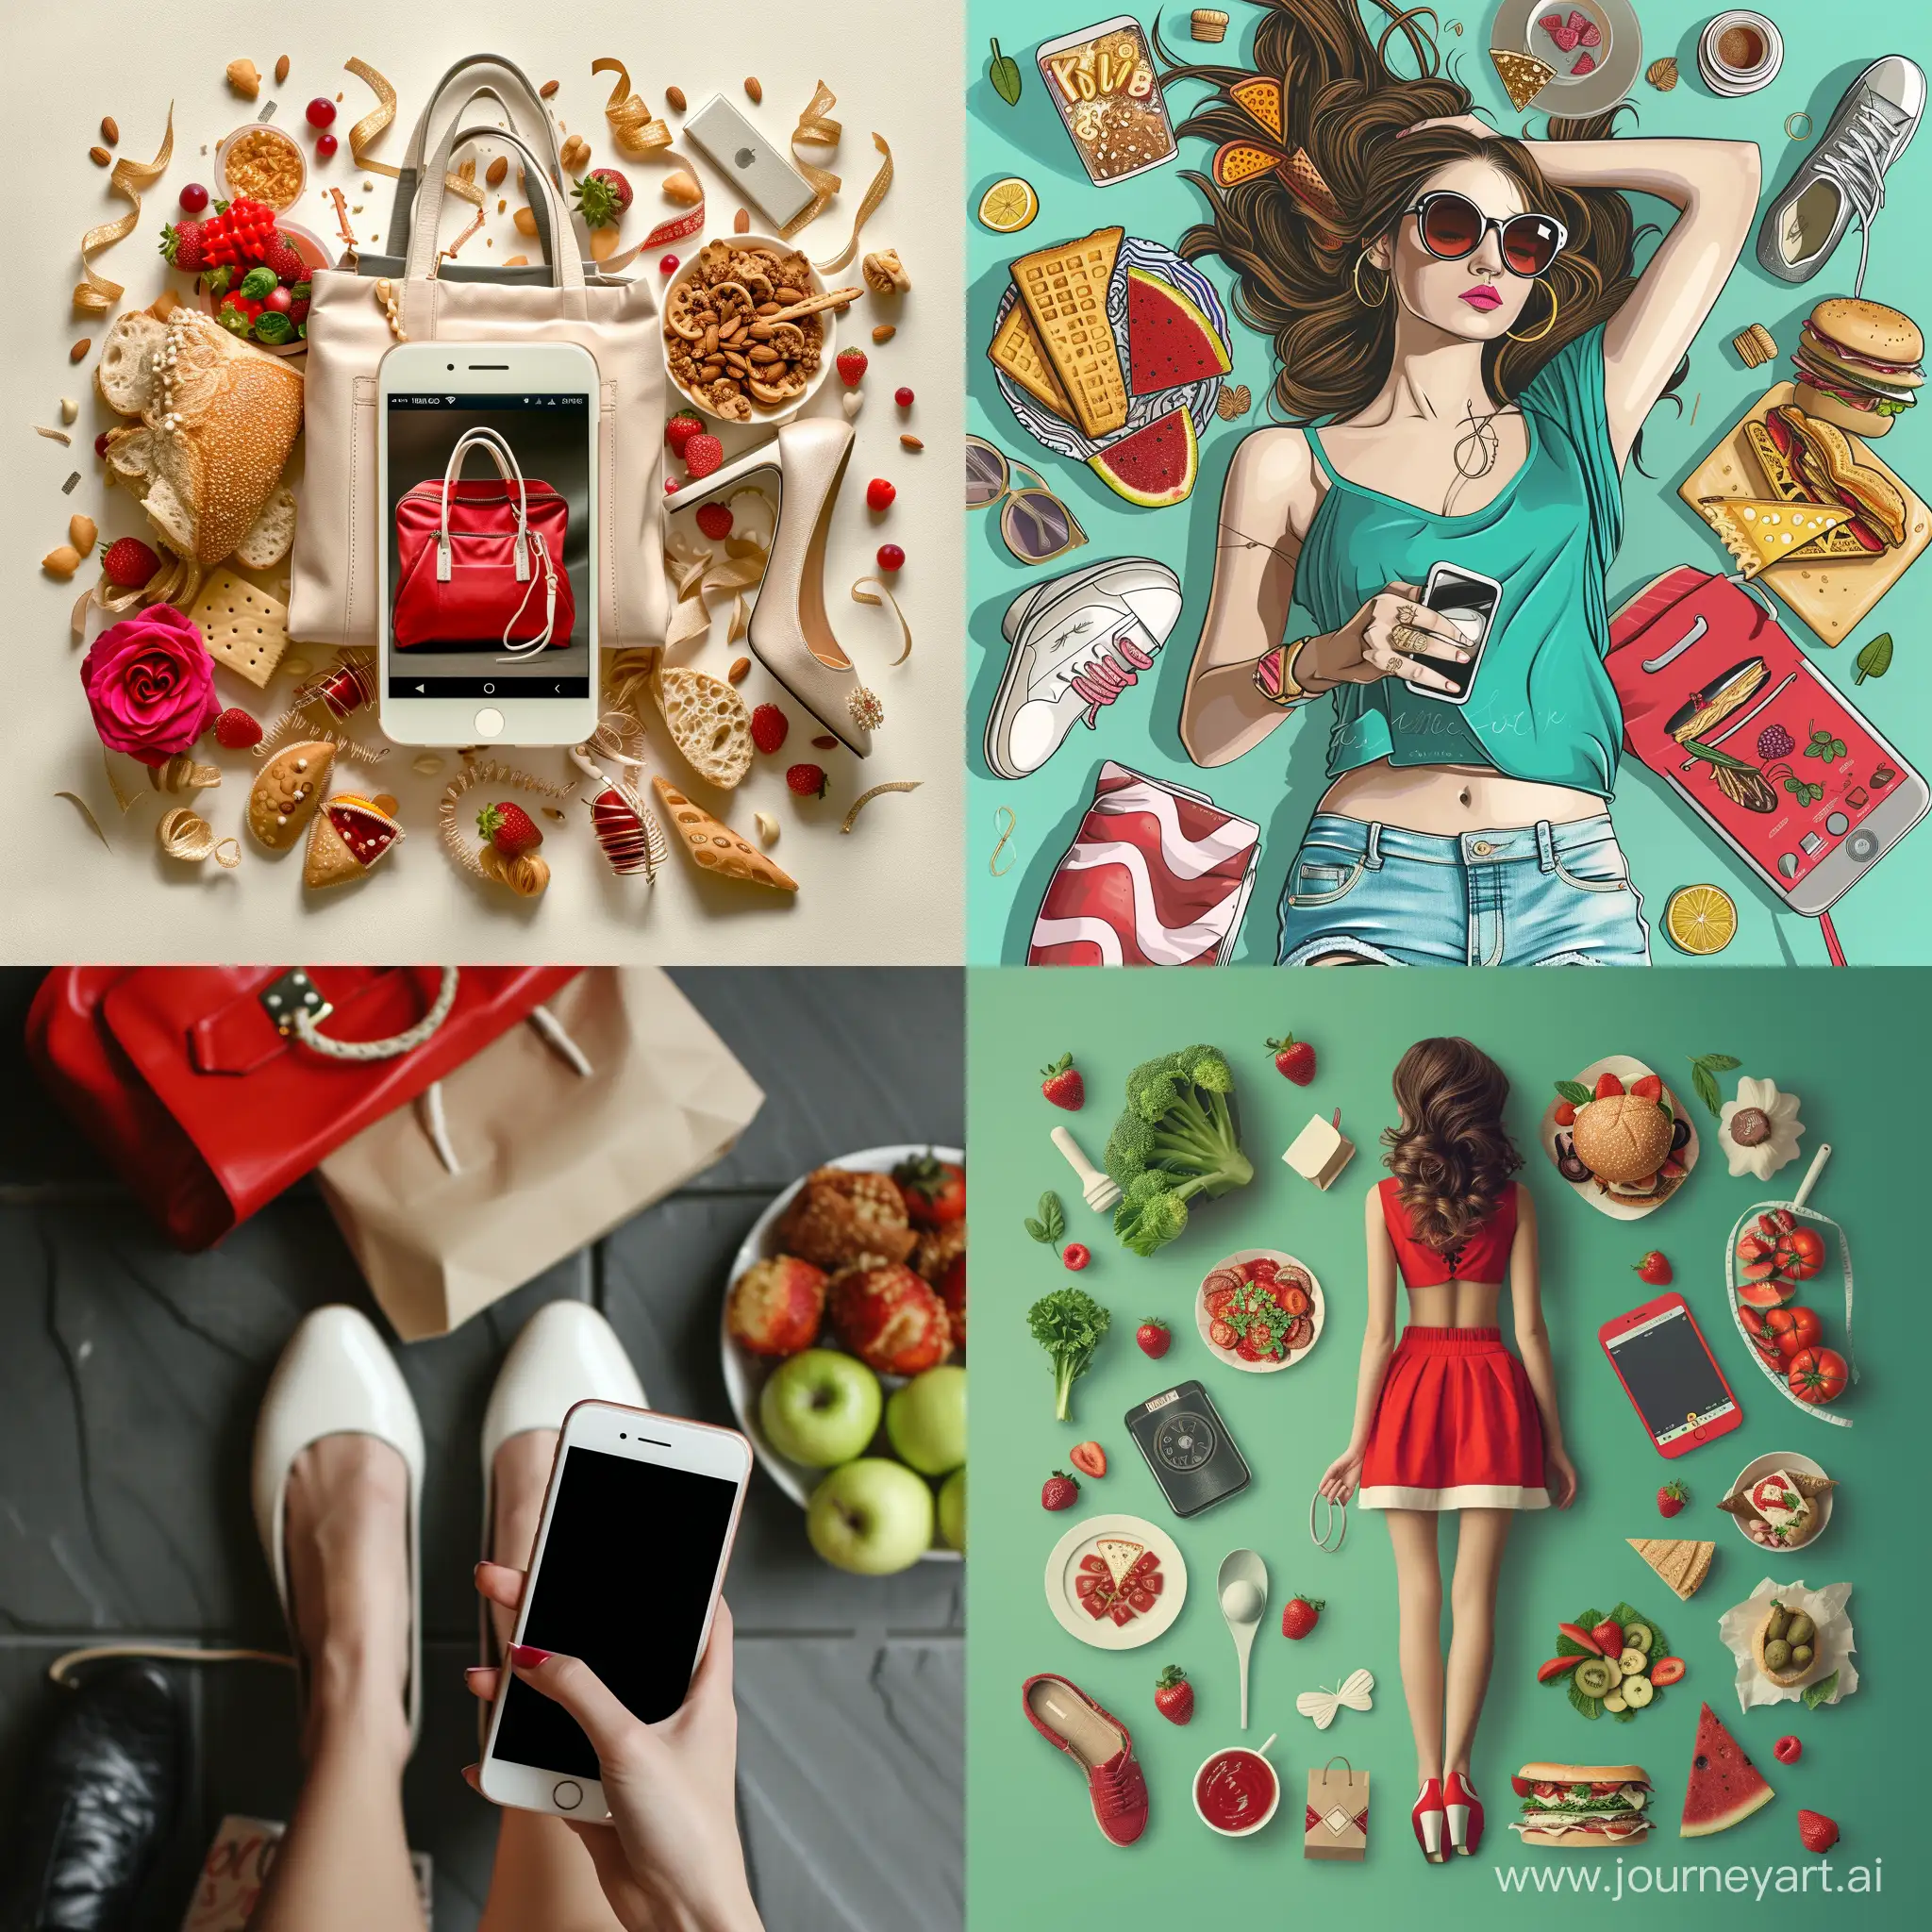 Stylish-Girl-Shopping-for-Fashion-Shoes-Clothes-Phone-and-Food